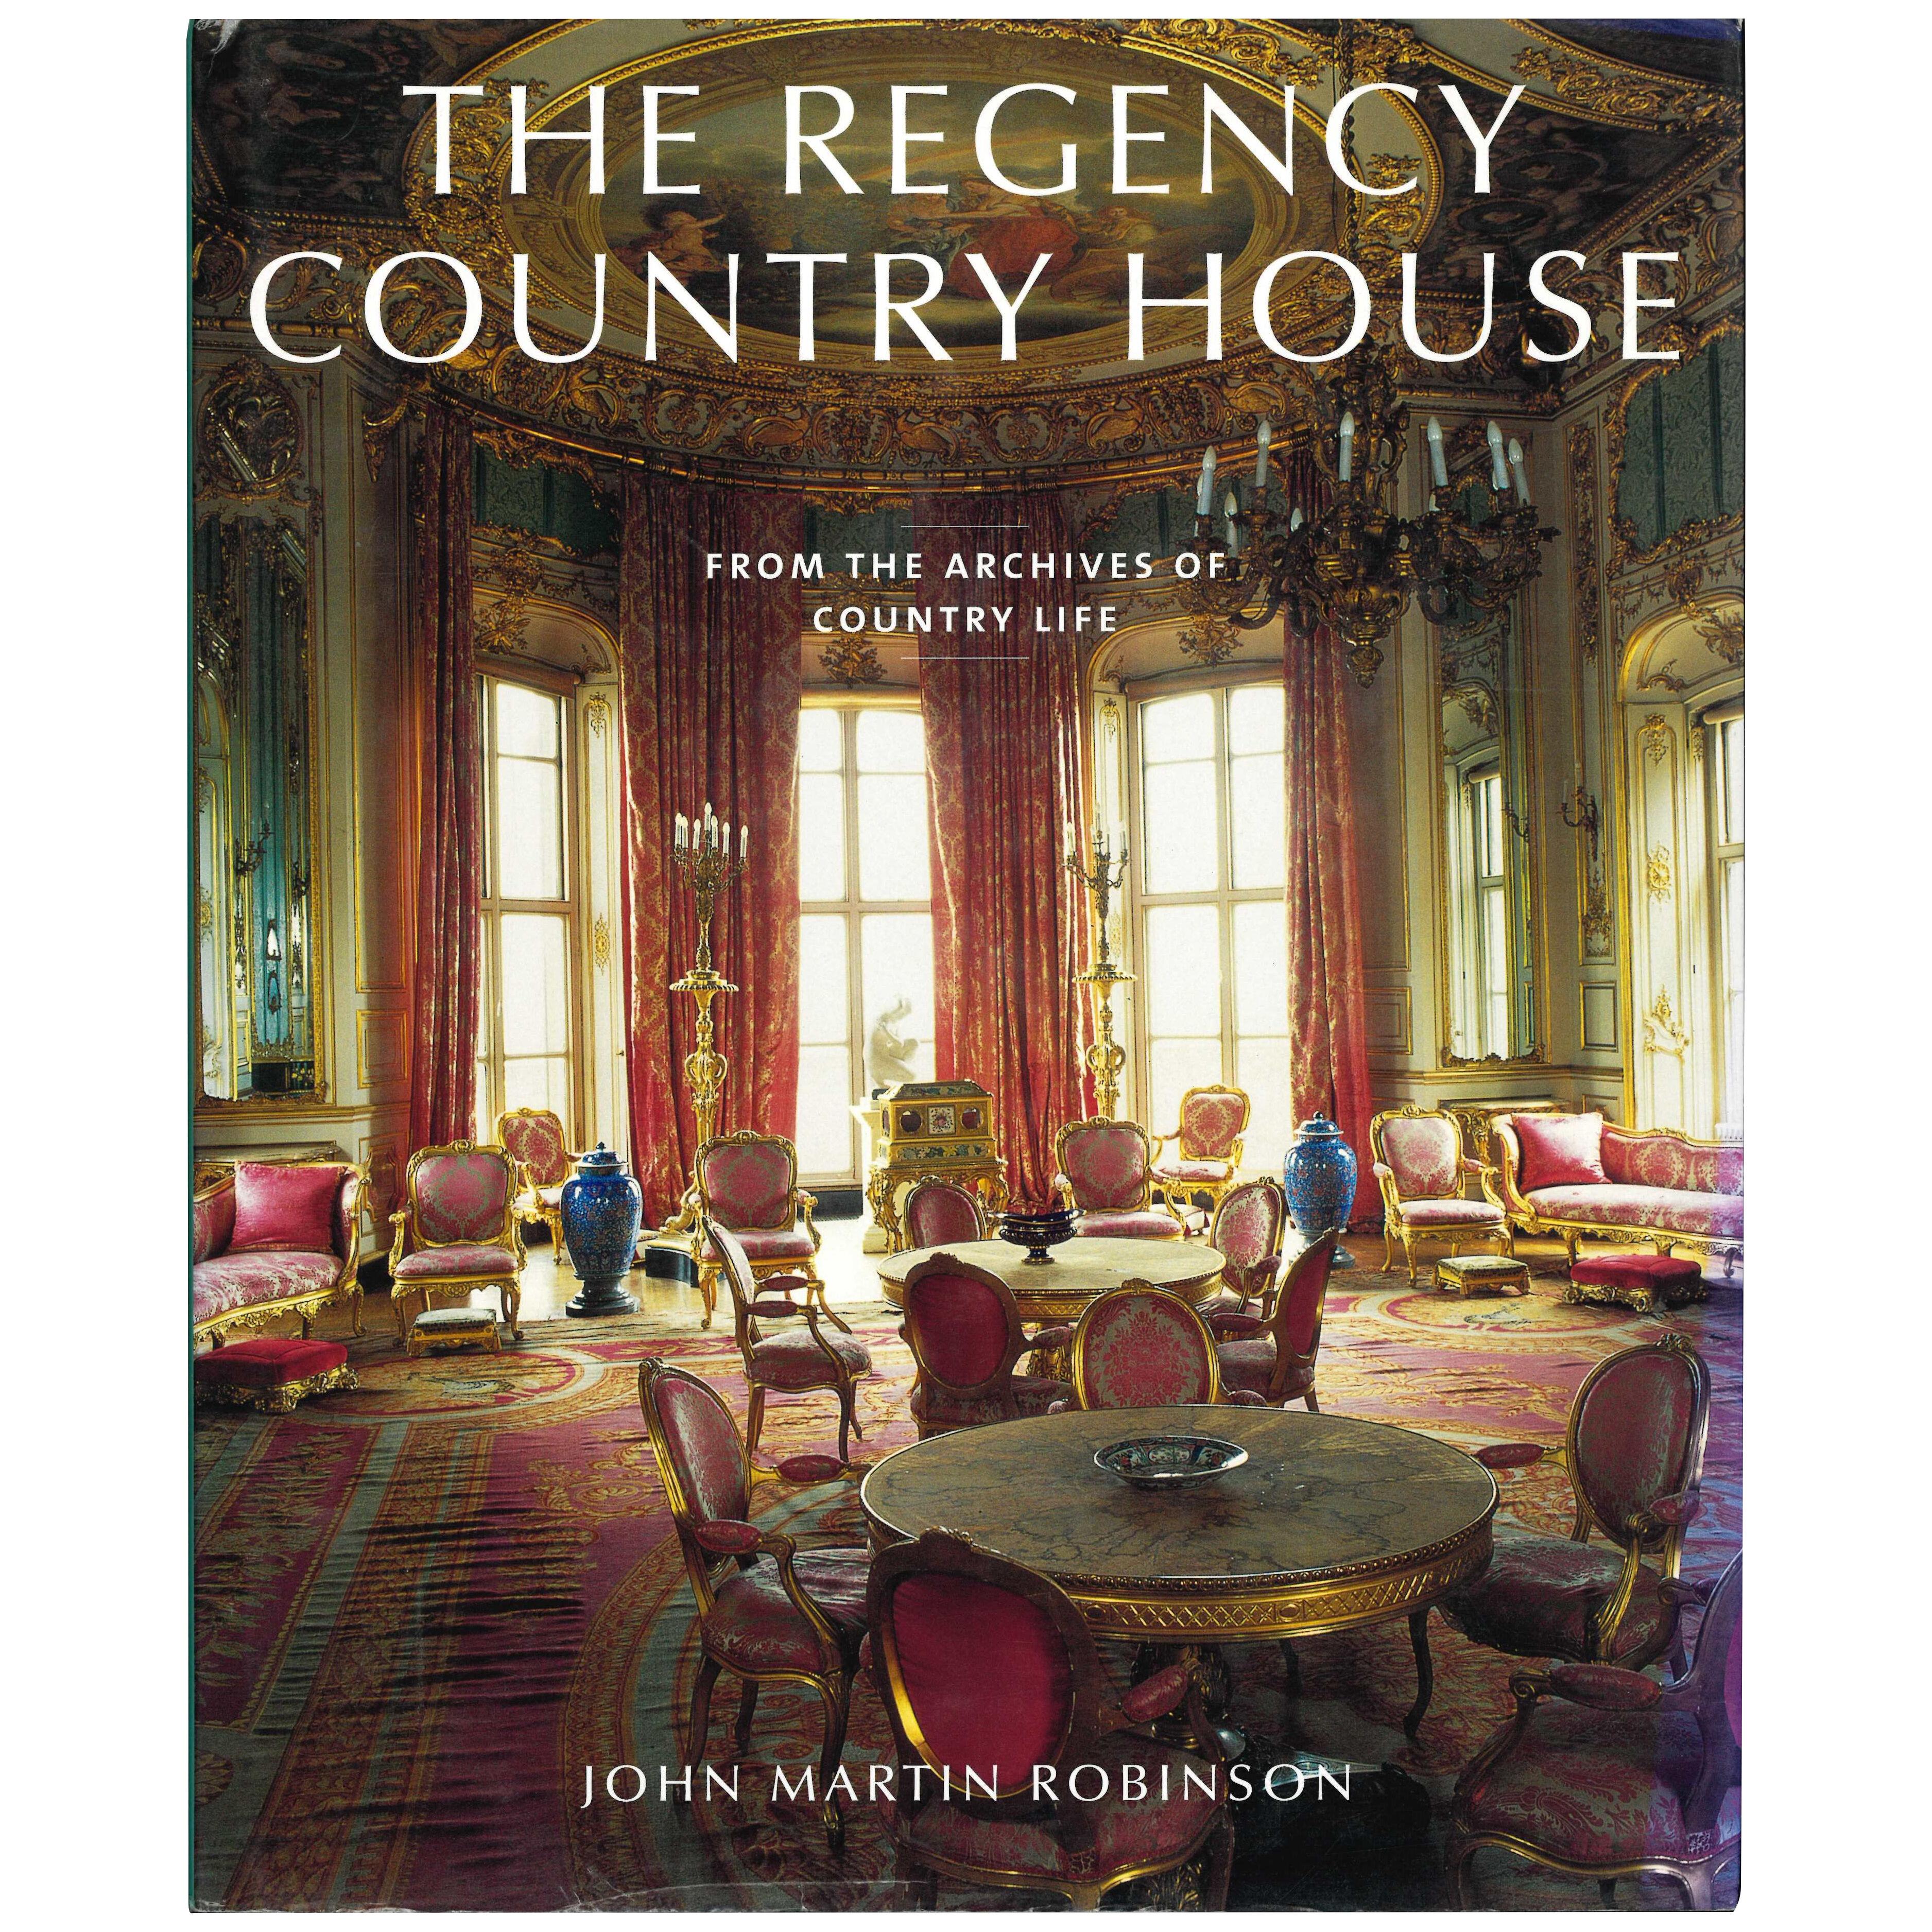 THE REGENCY COUNTRY HOUSE. Book